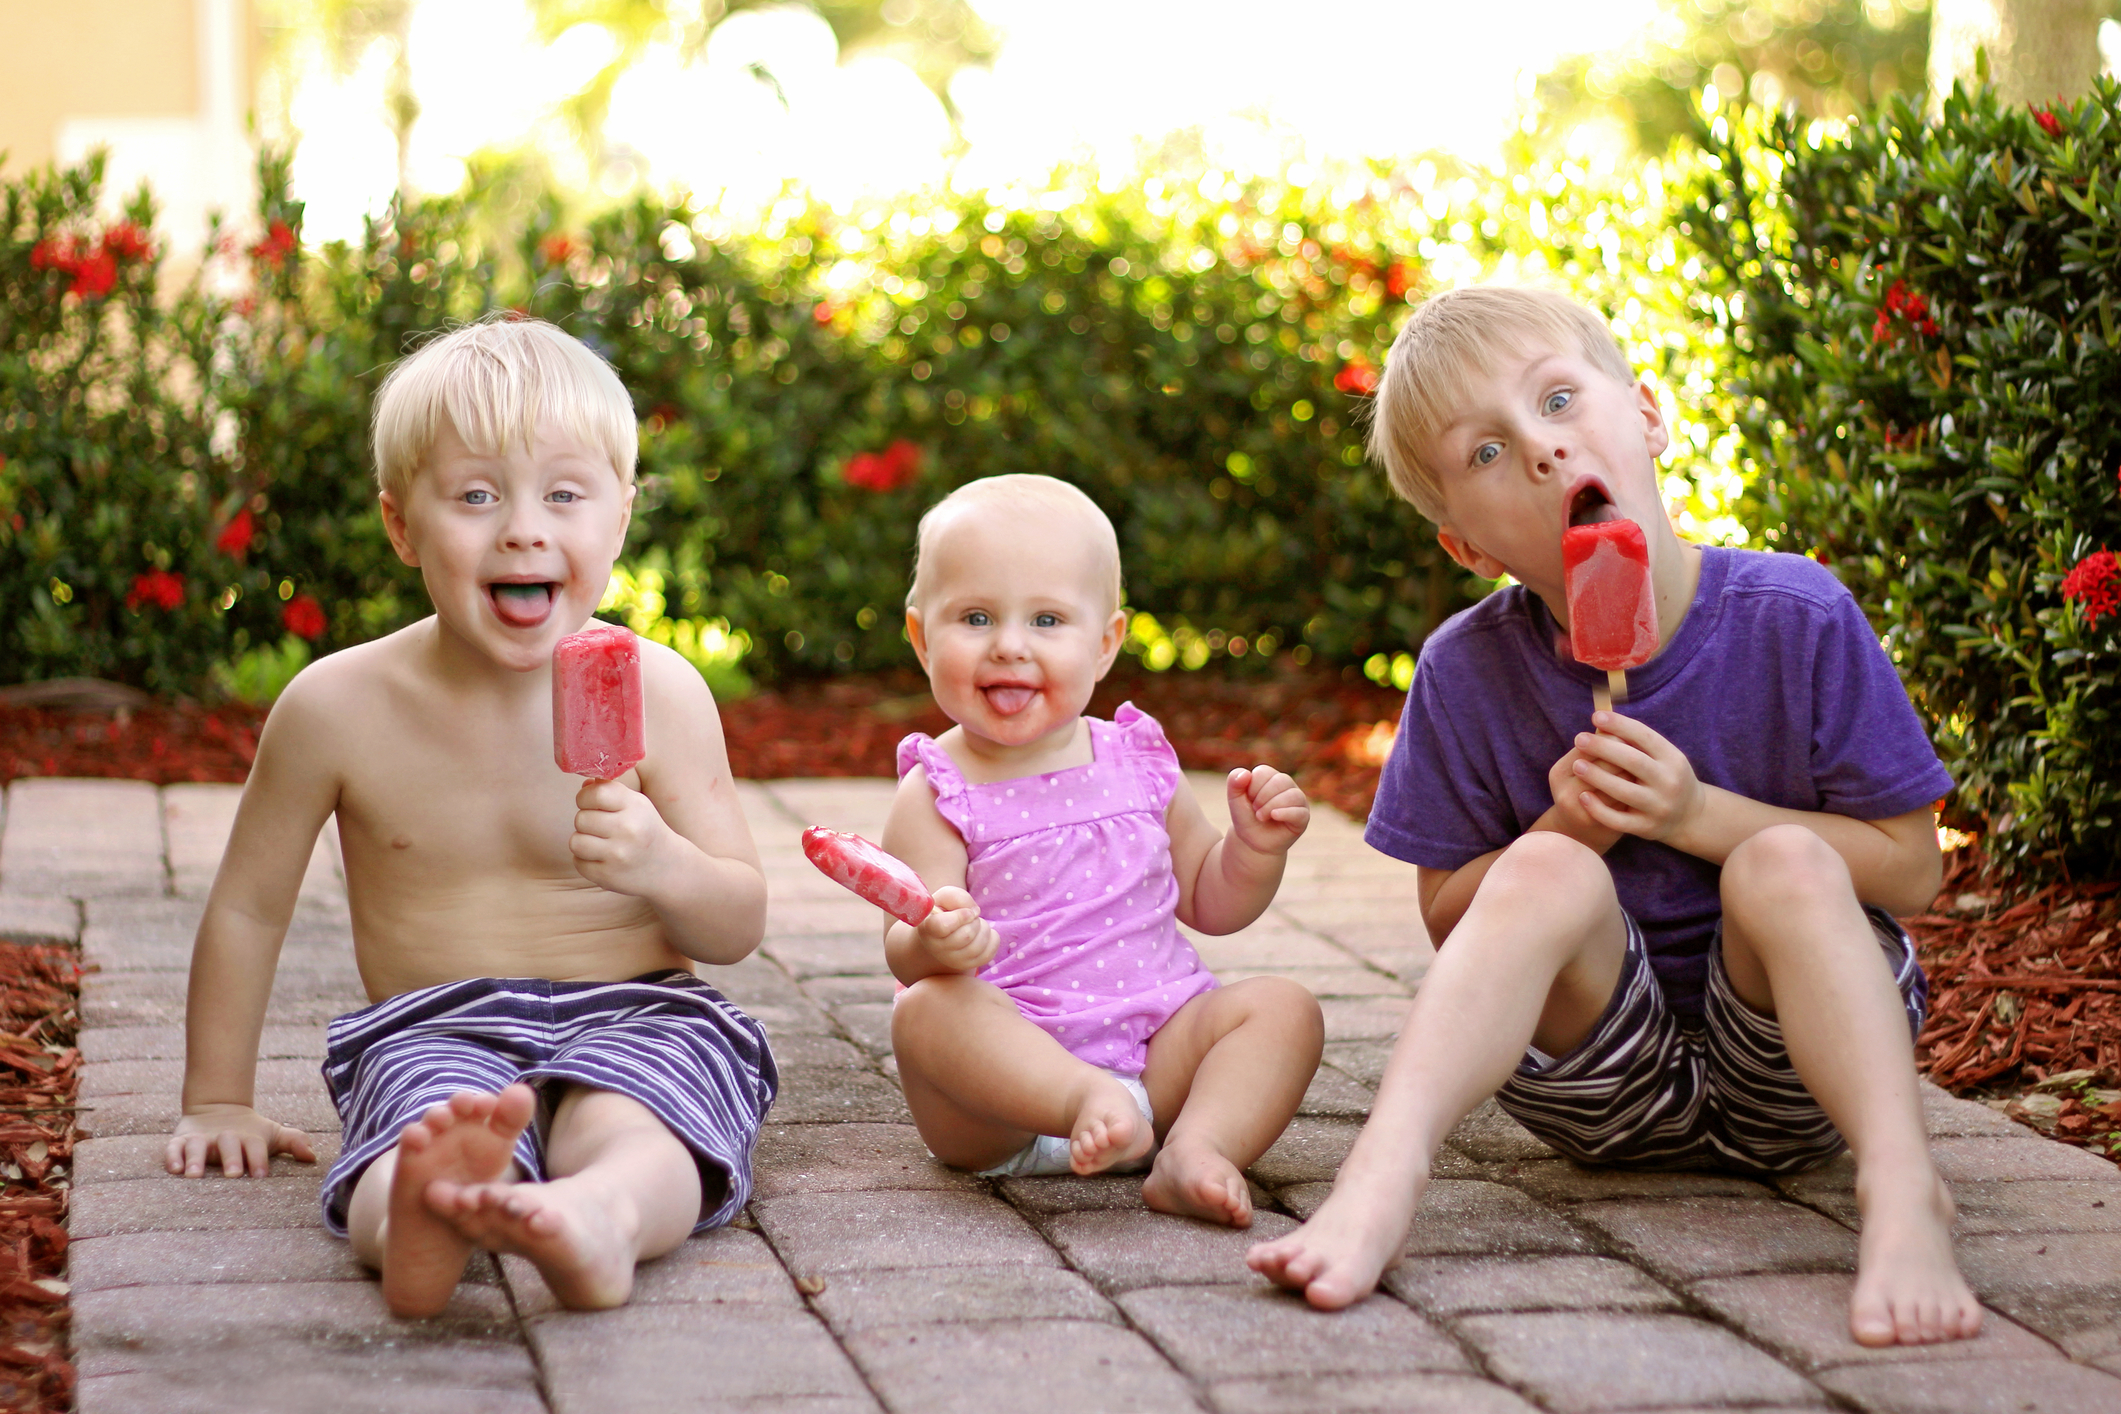 DIY Popsicle Flavors for Your Kids